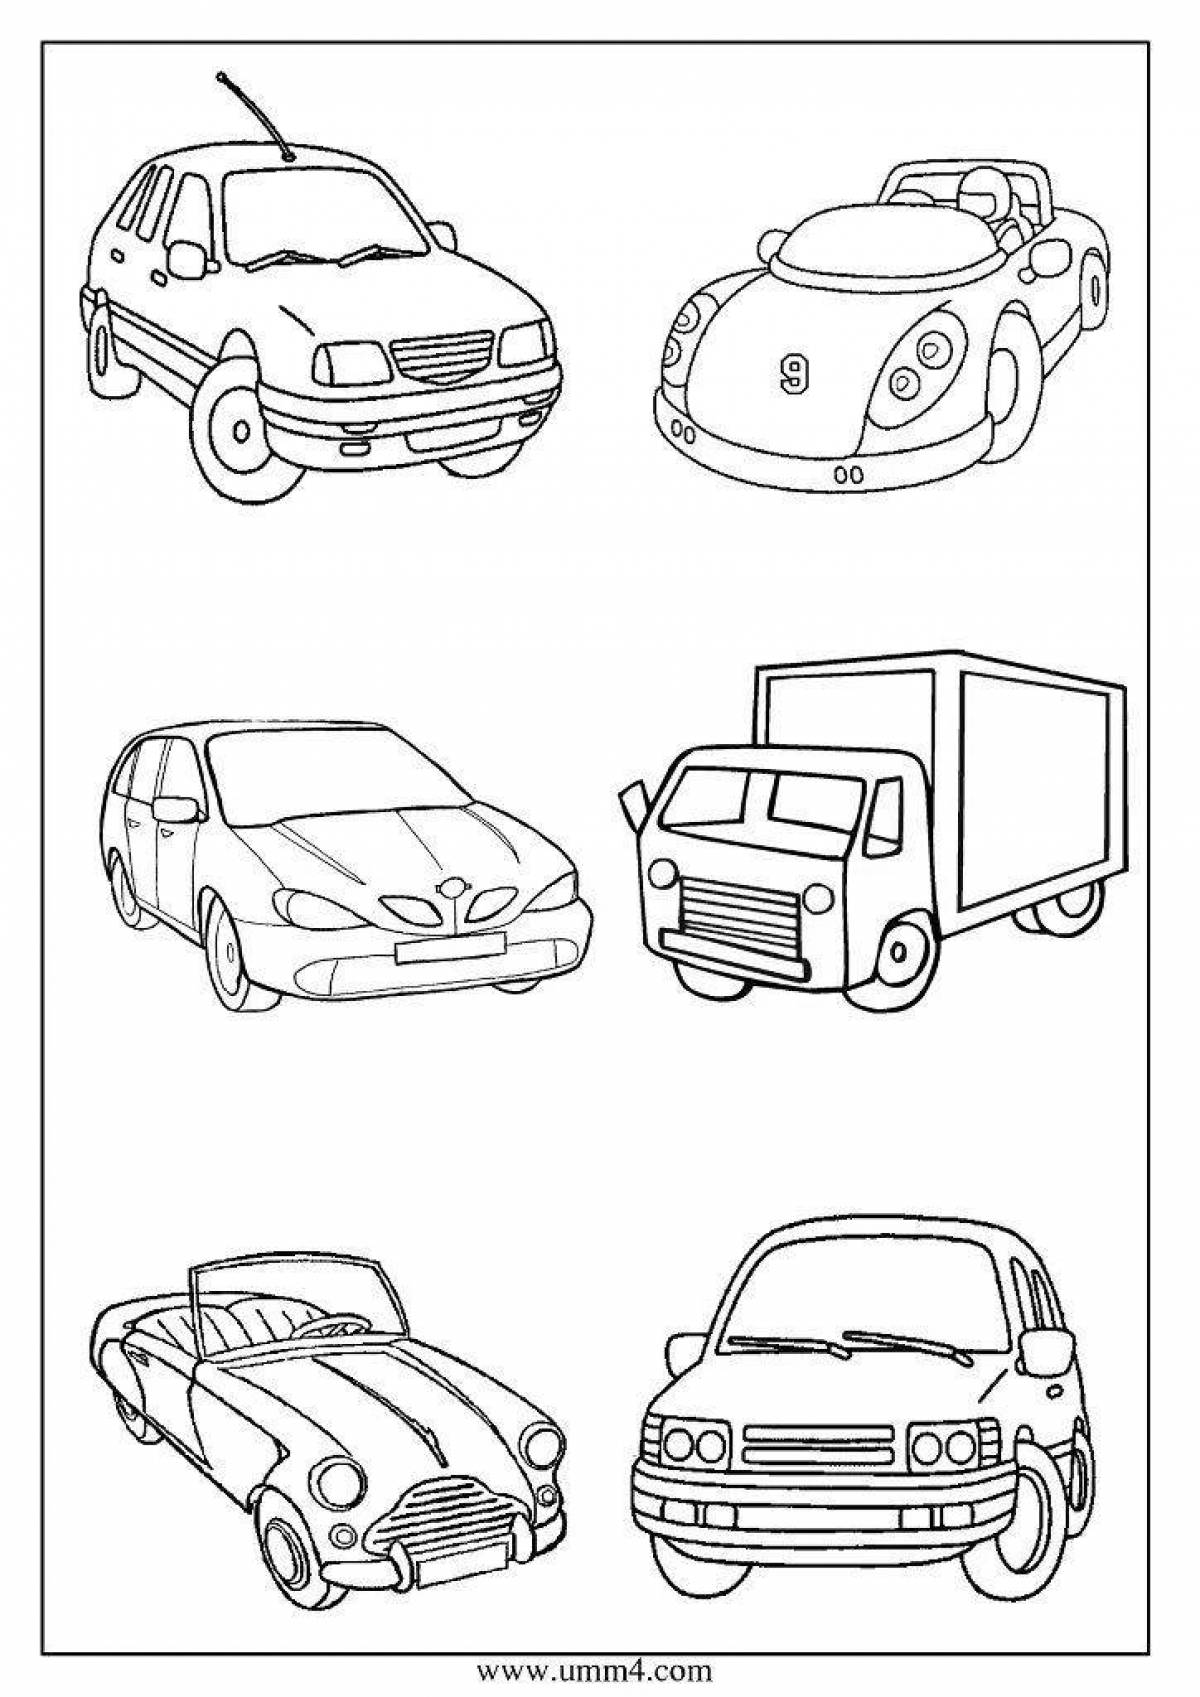 Great cars coloring book